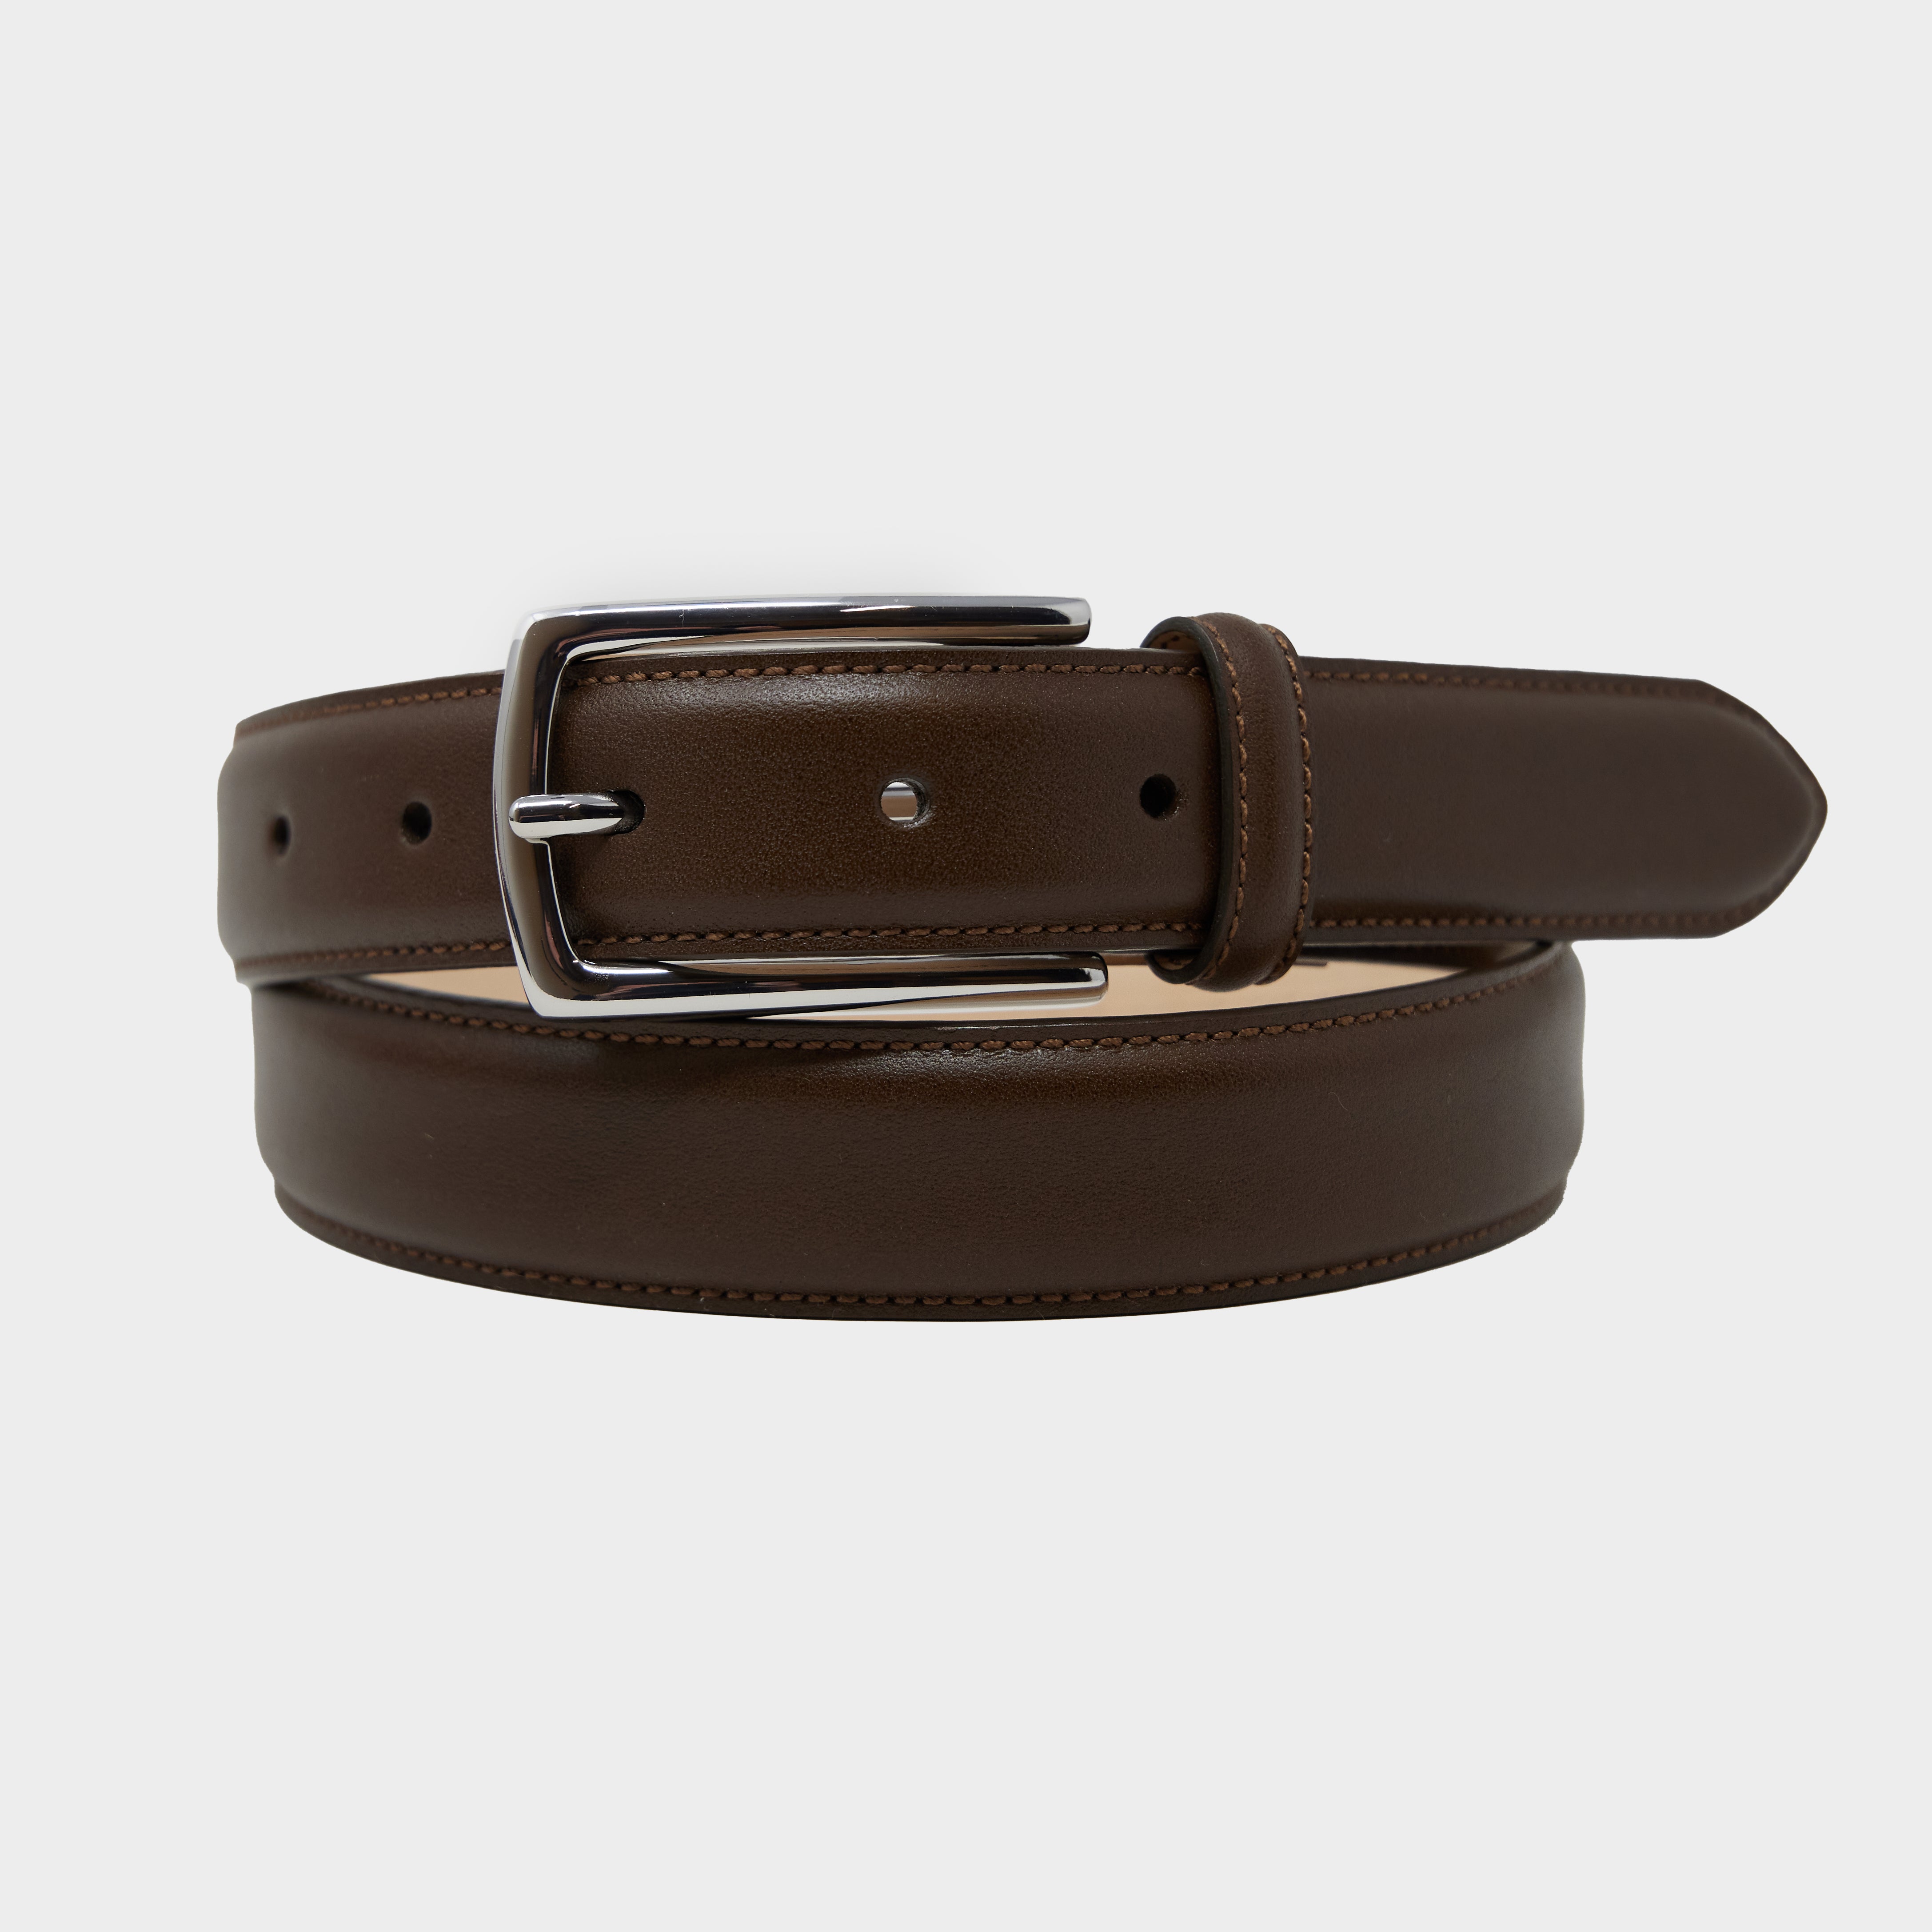 Todd Snyder Classic Dress Belt in Toasted Brown